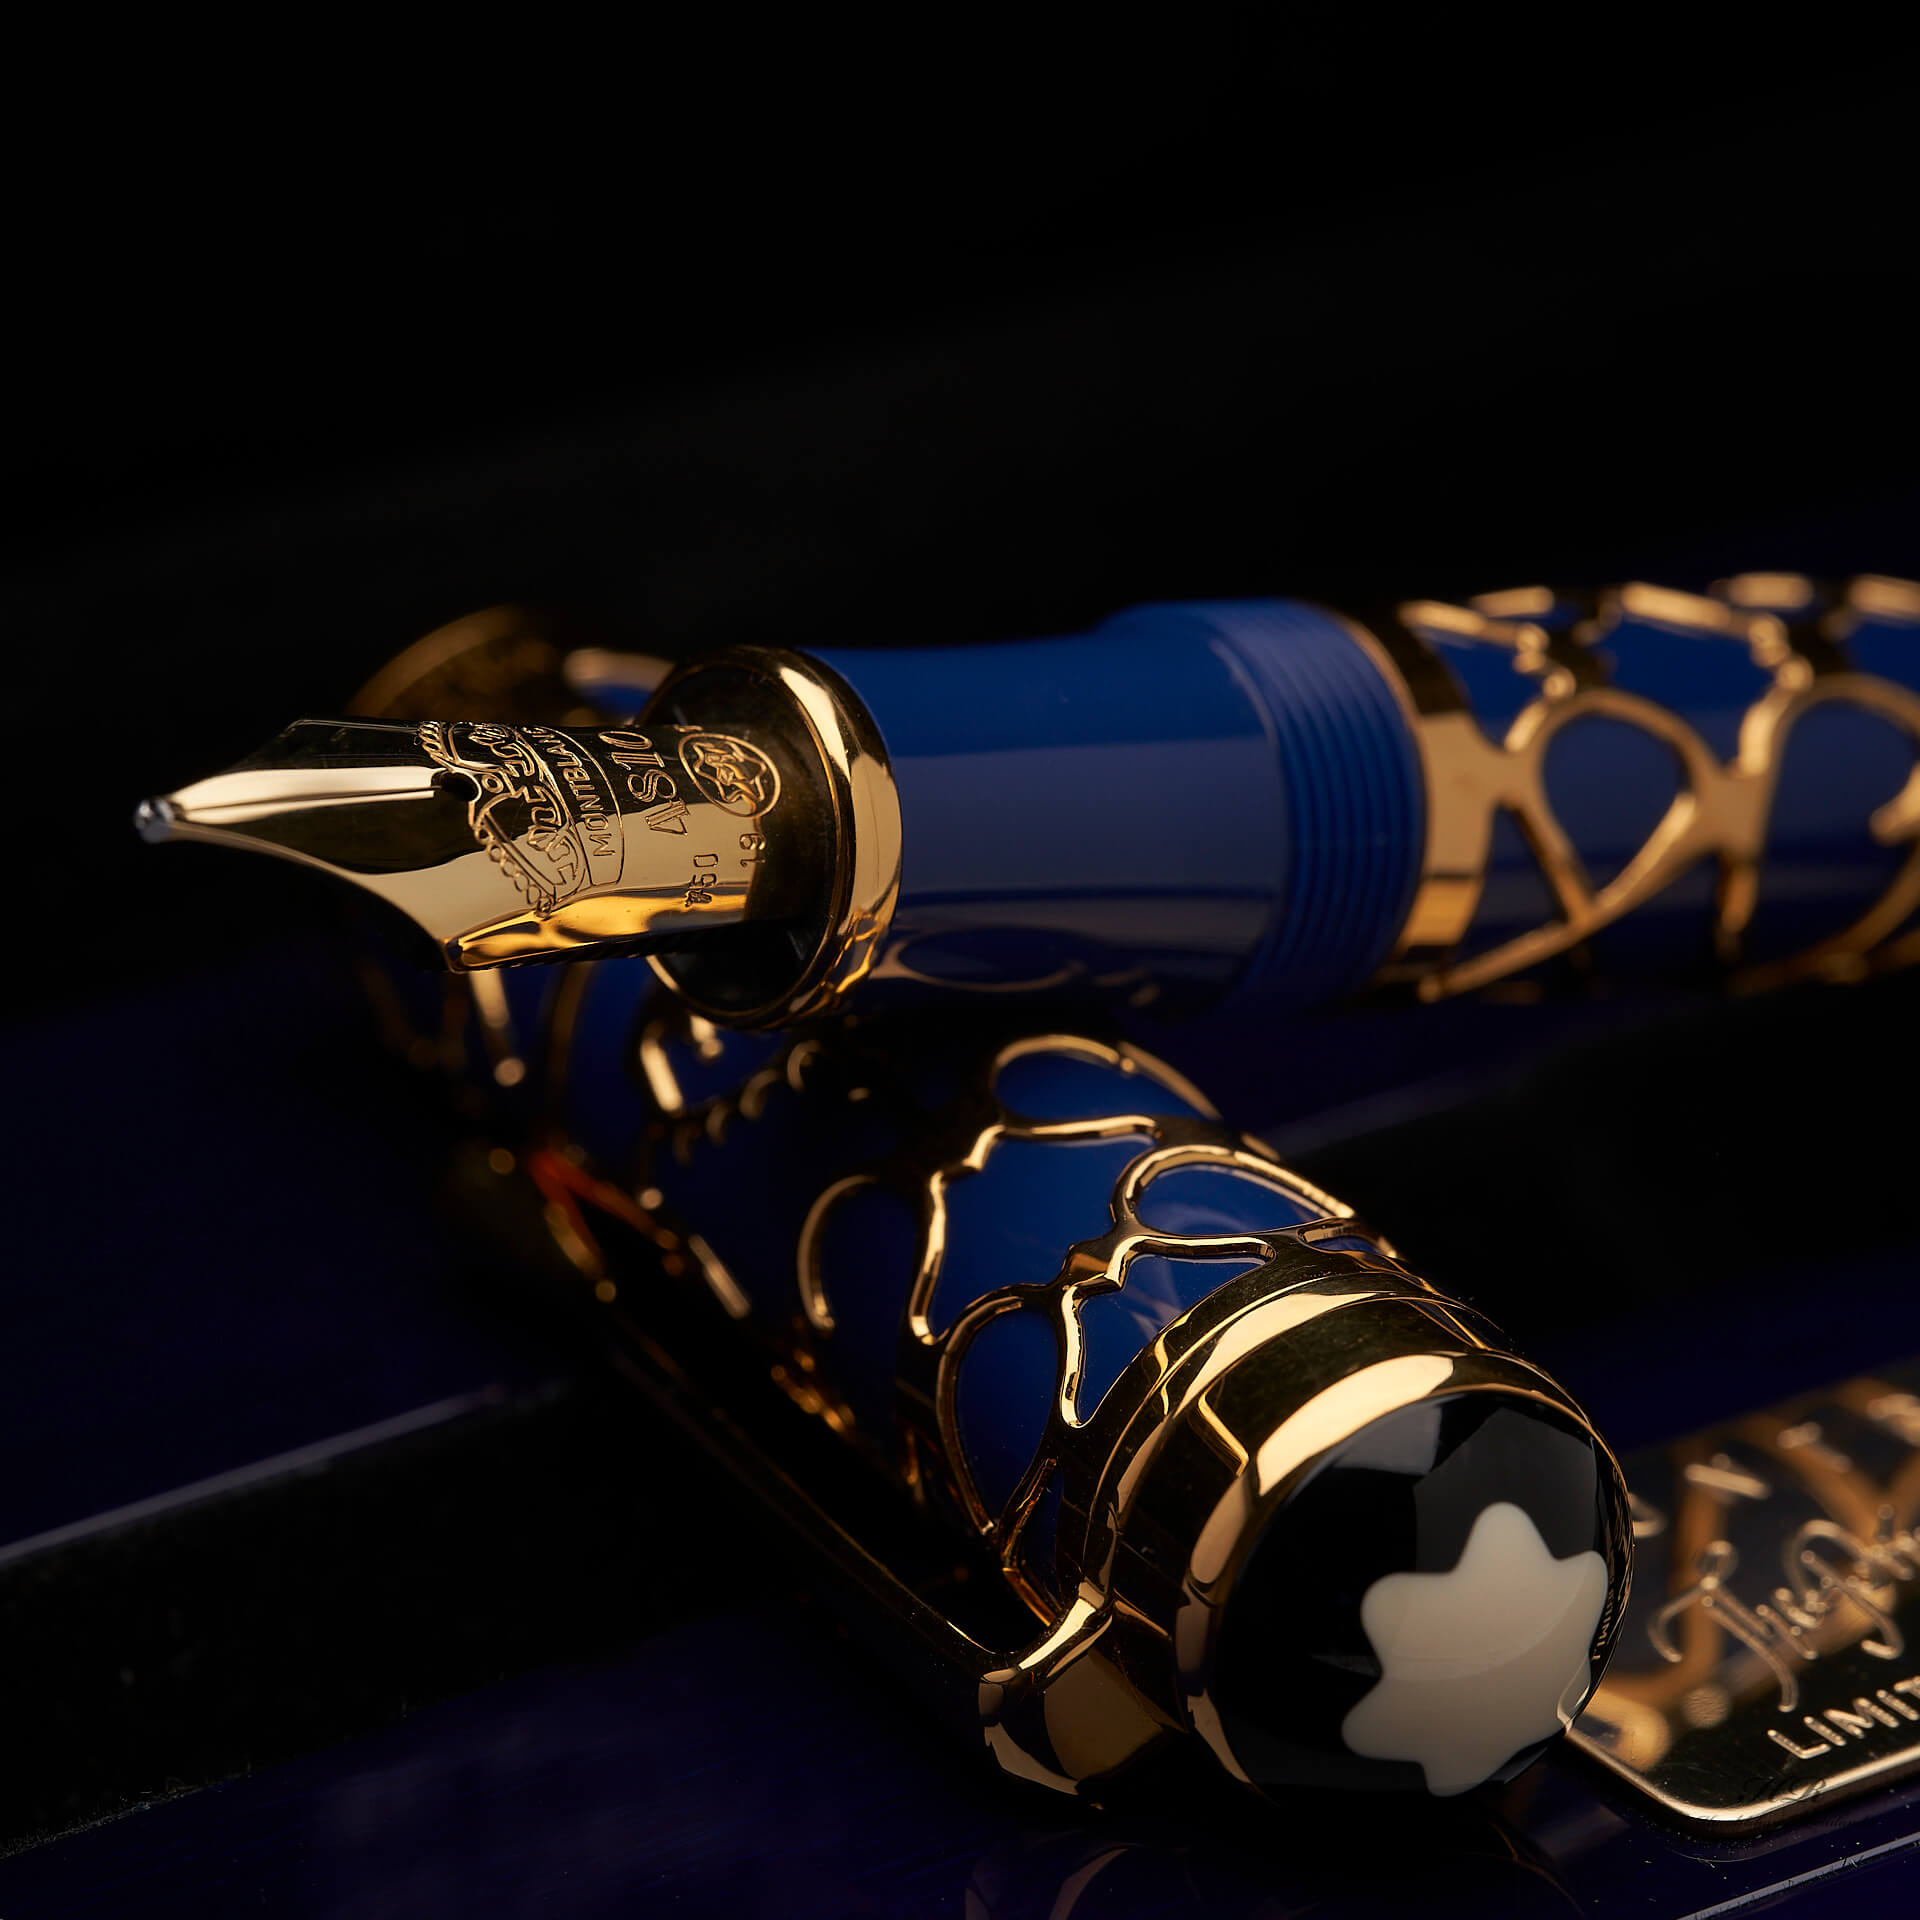 montblanc-patron-of-the-art-the-prince-regent-limited-edition-4810